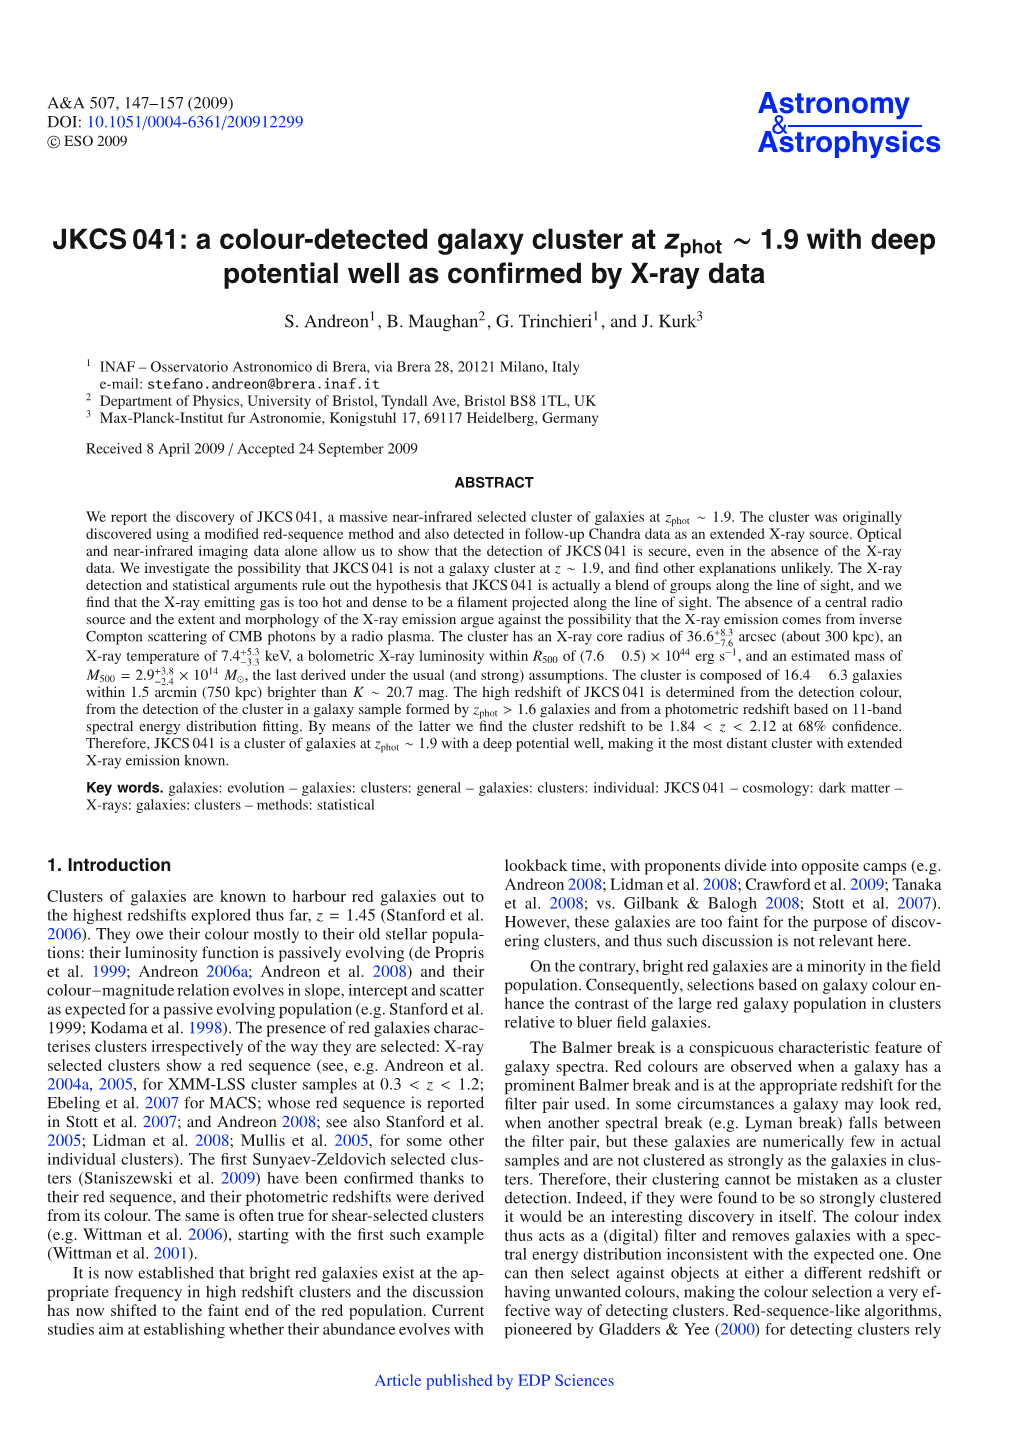 JKCS 041: a Colour-Detected Galaxy Cluster at Zphot ∼ 1.9 with Deep Potential Well As Conﬁrmed by X-Ray Data